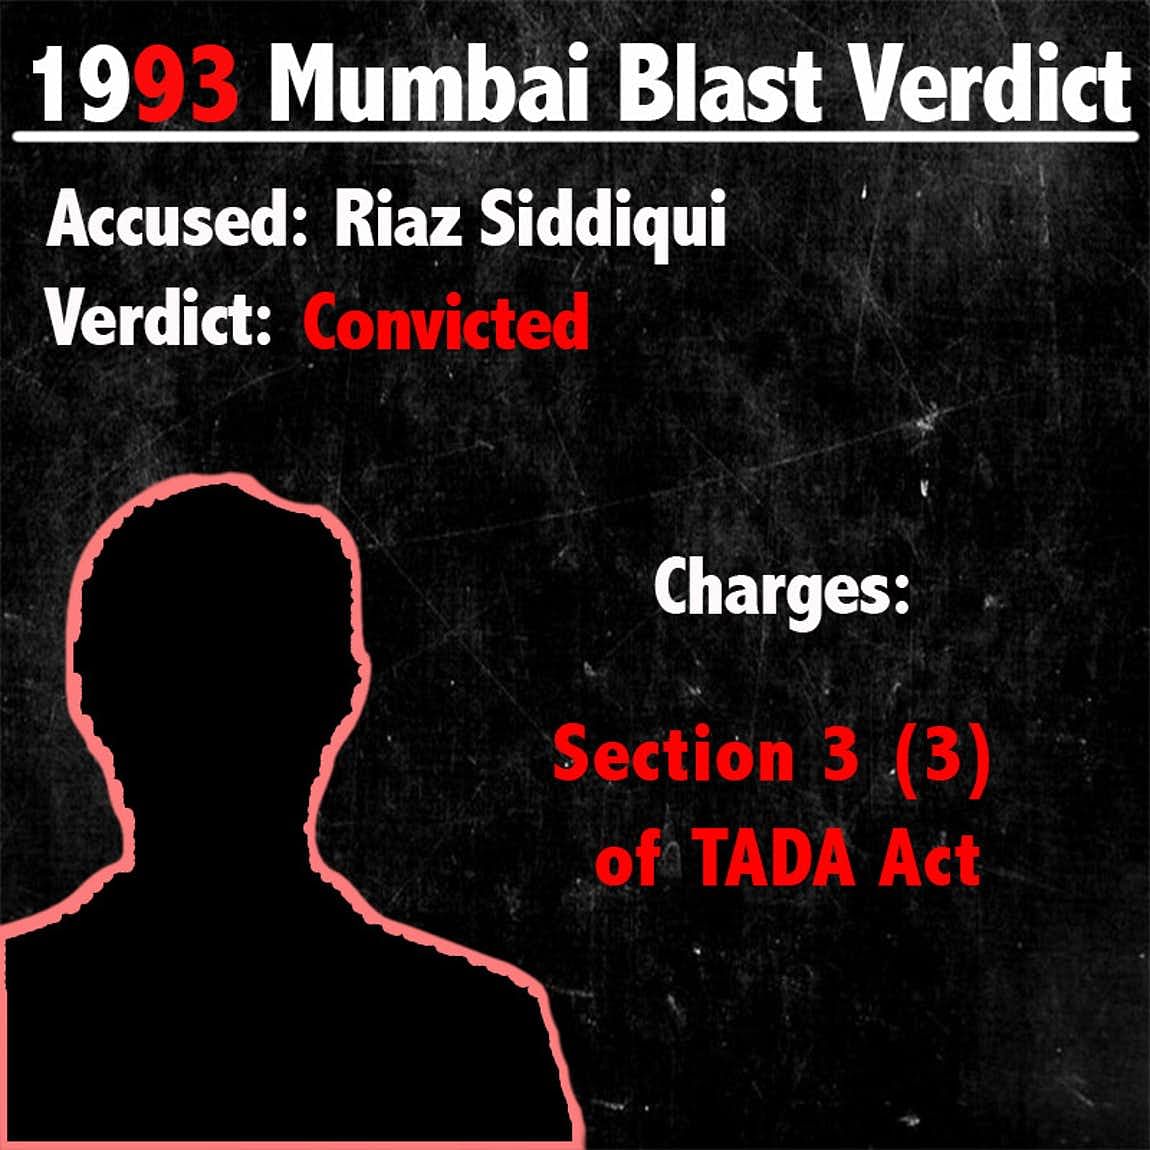 Six persons, including extradited gangster Abu Salem and Mustafa Dossa were convicted by a TADA court in June.